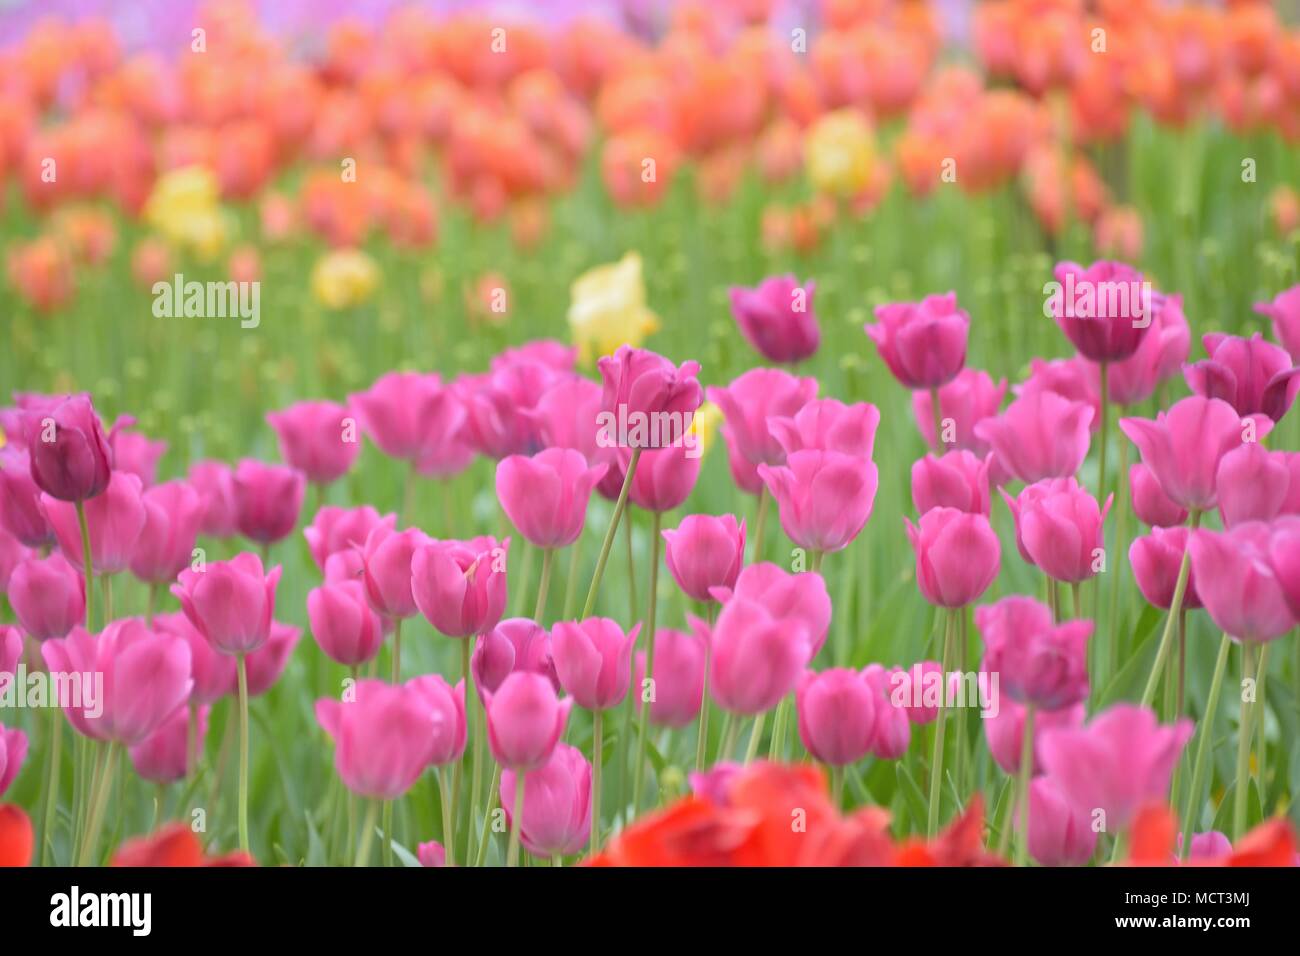 Landscape of colorful Tulip flowers in garden Stock Photo